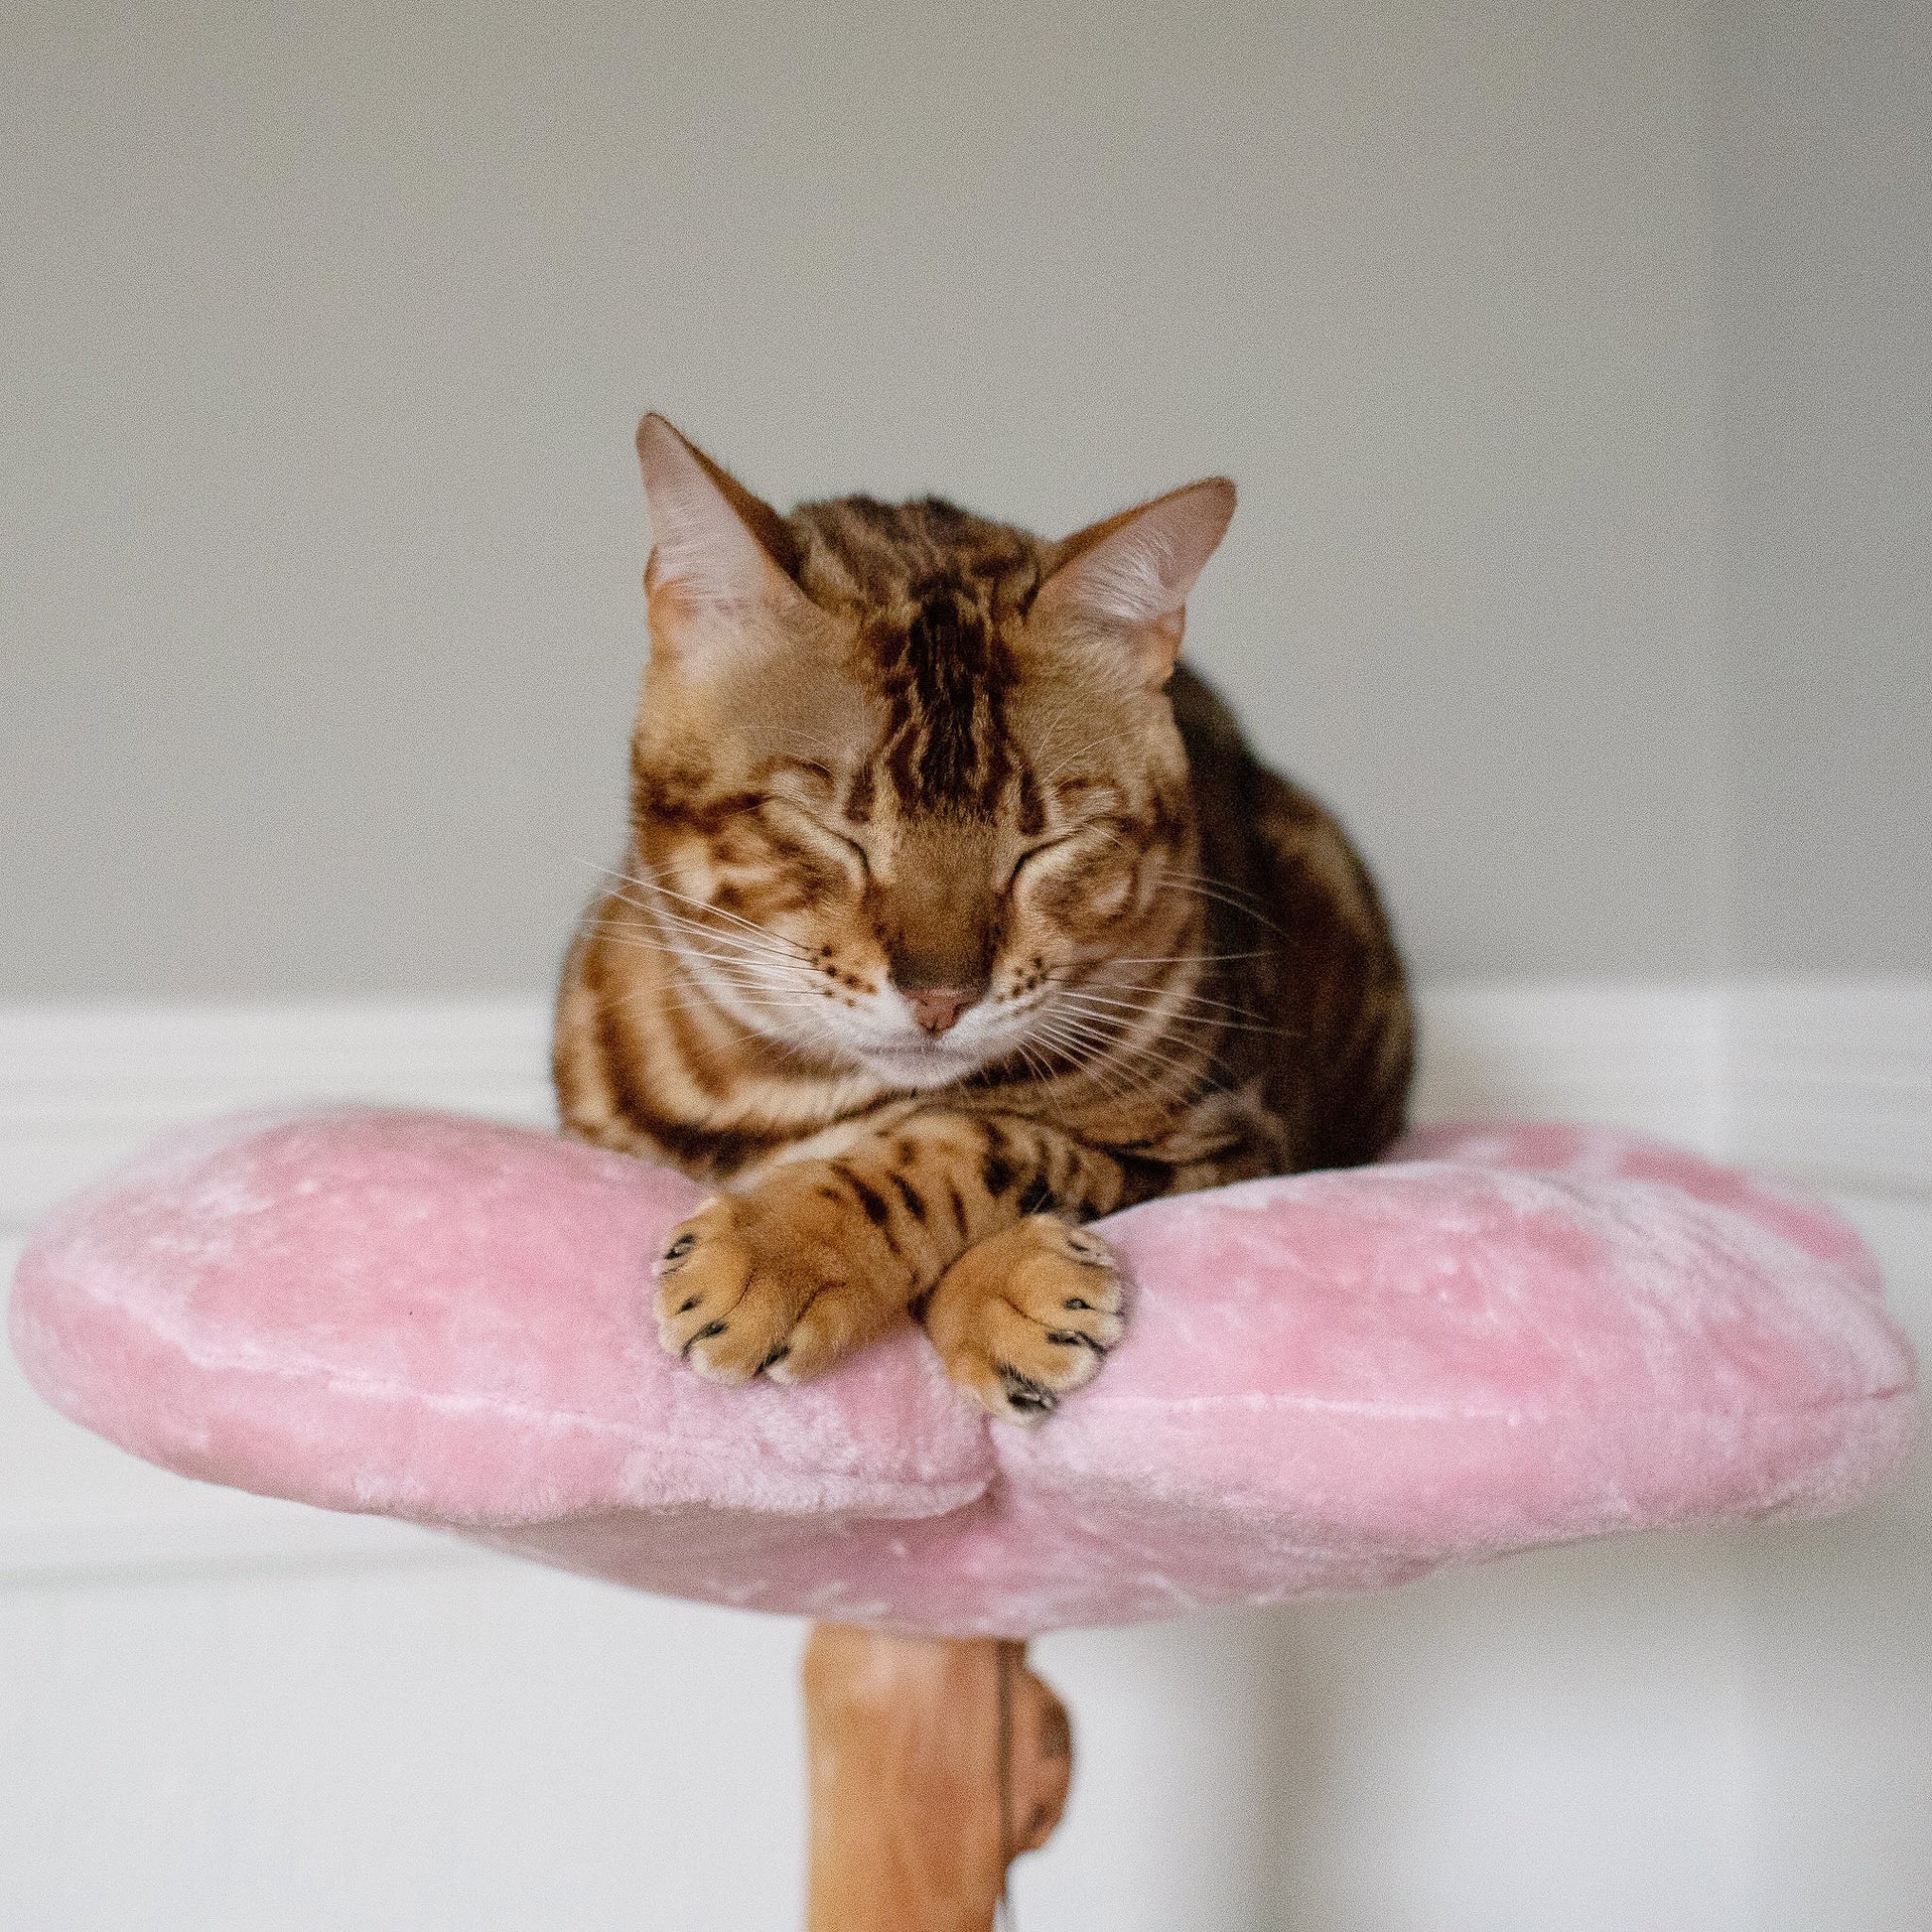 Cat rests on pink cat tree with cherry blossom patterns